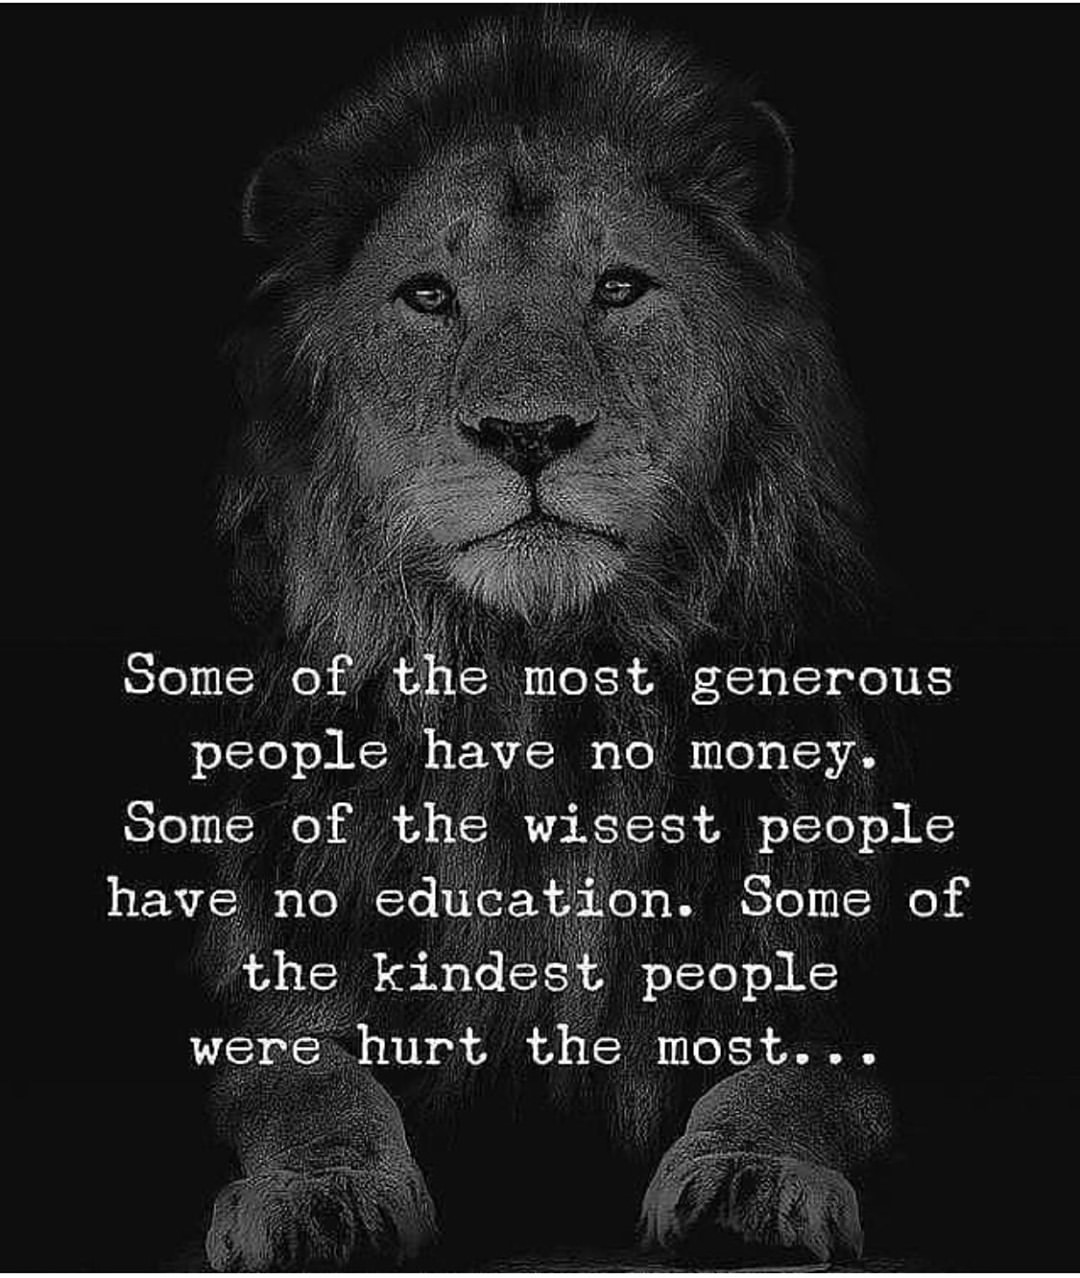 Some the most generous people have no money. Some of the wisest people have no education. Some of the kindest people were hurt the most...